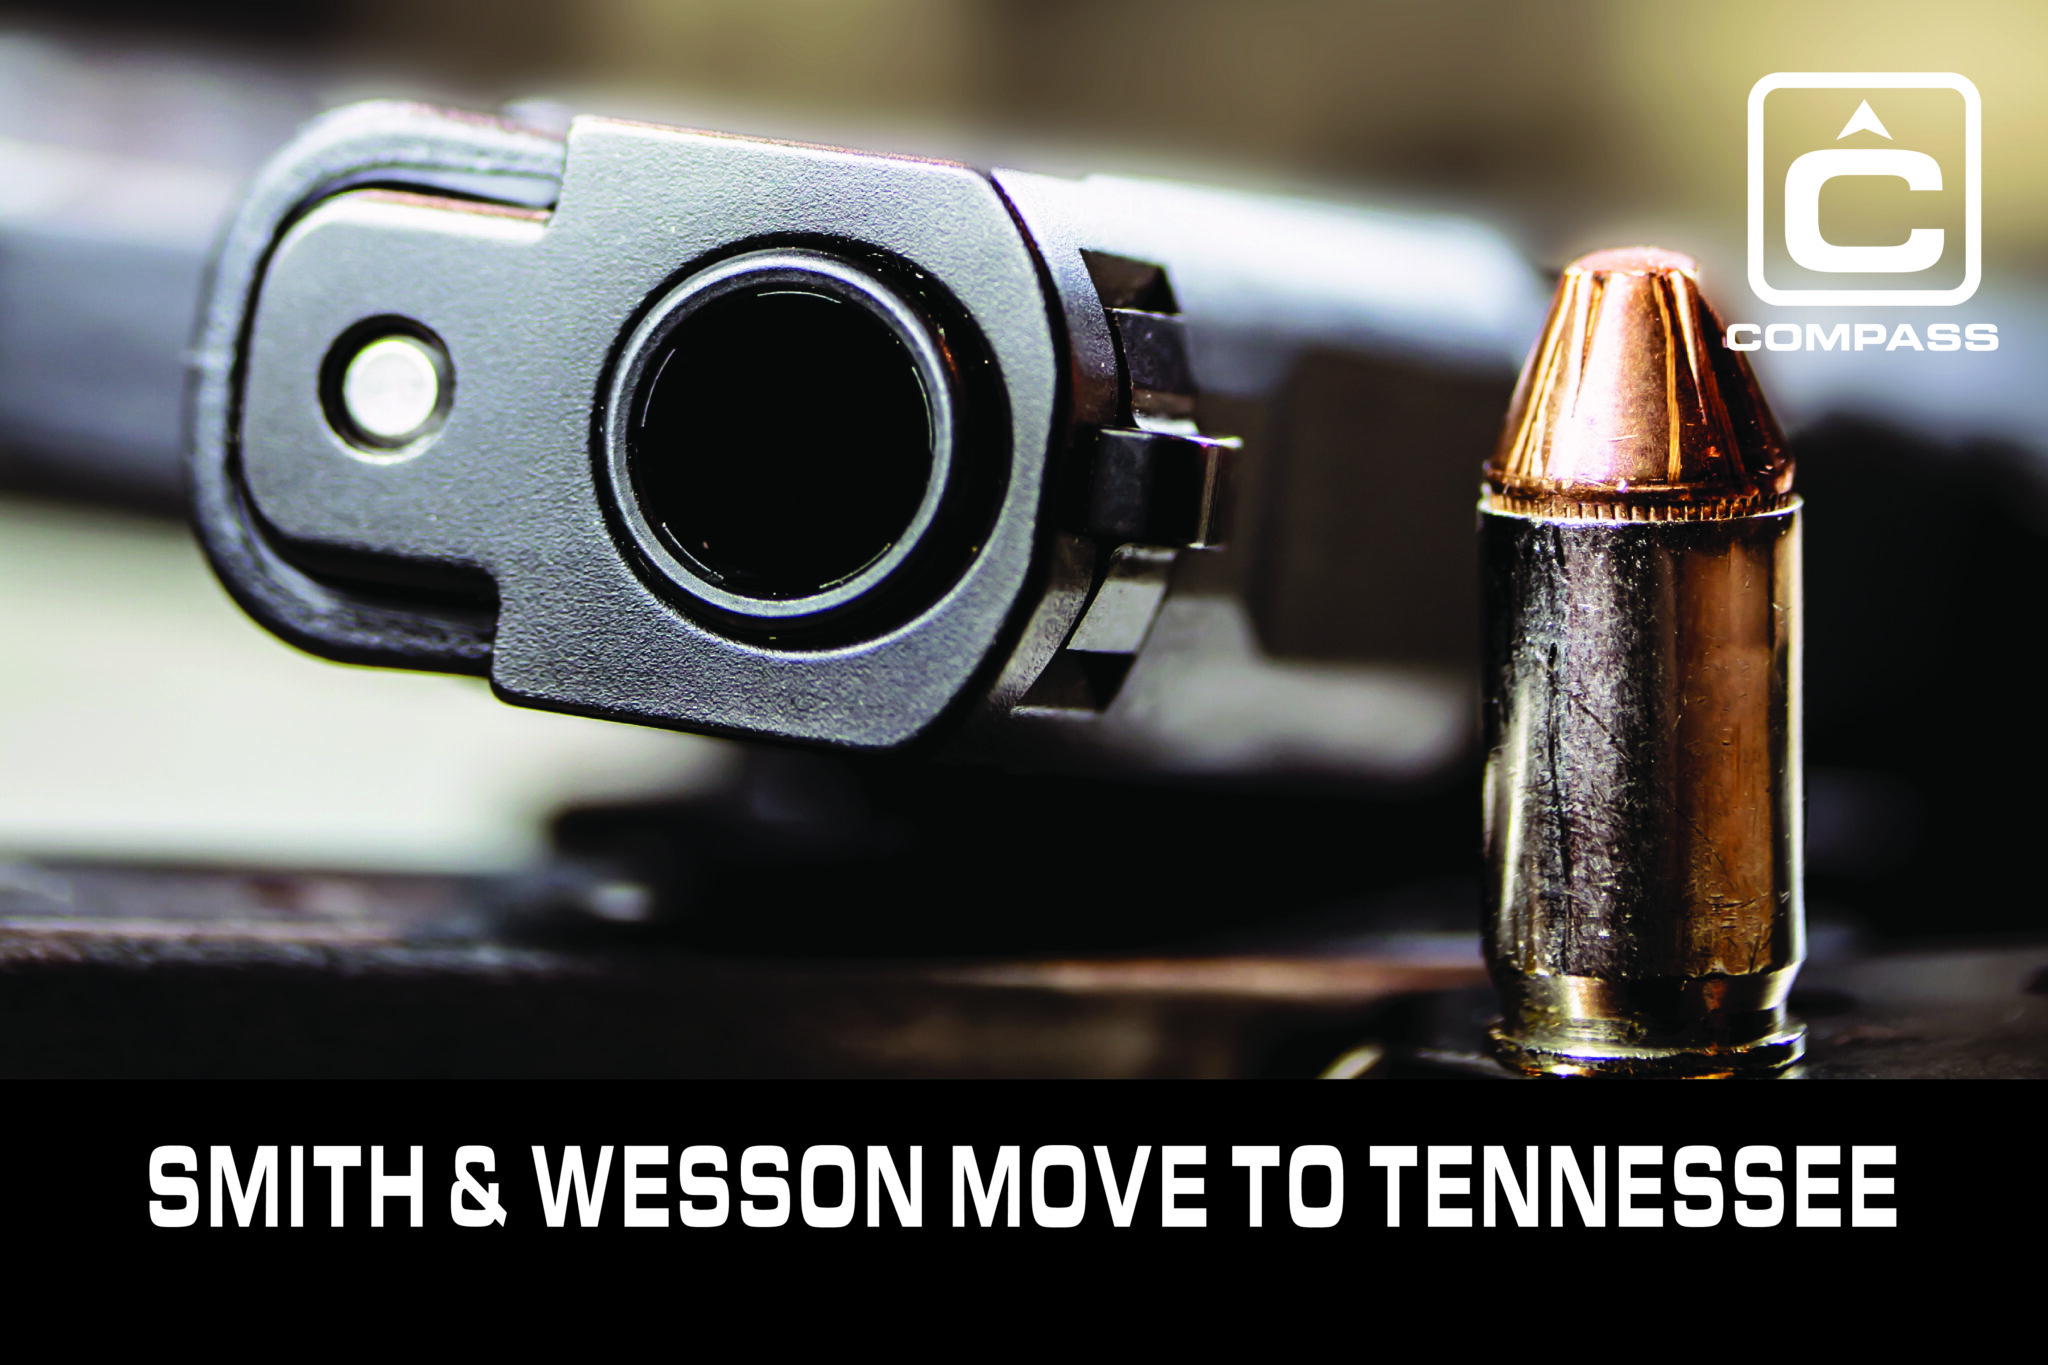 Smith & Wesson Come to Tennessee